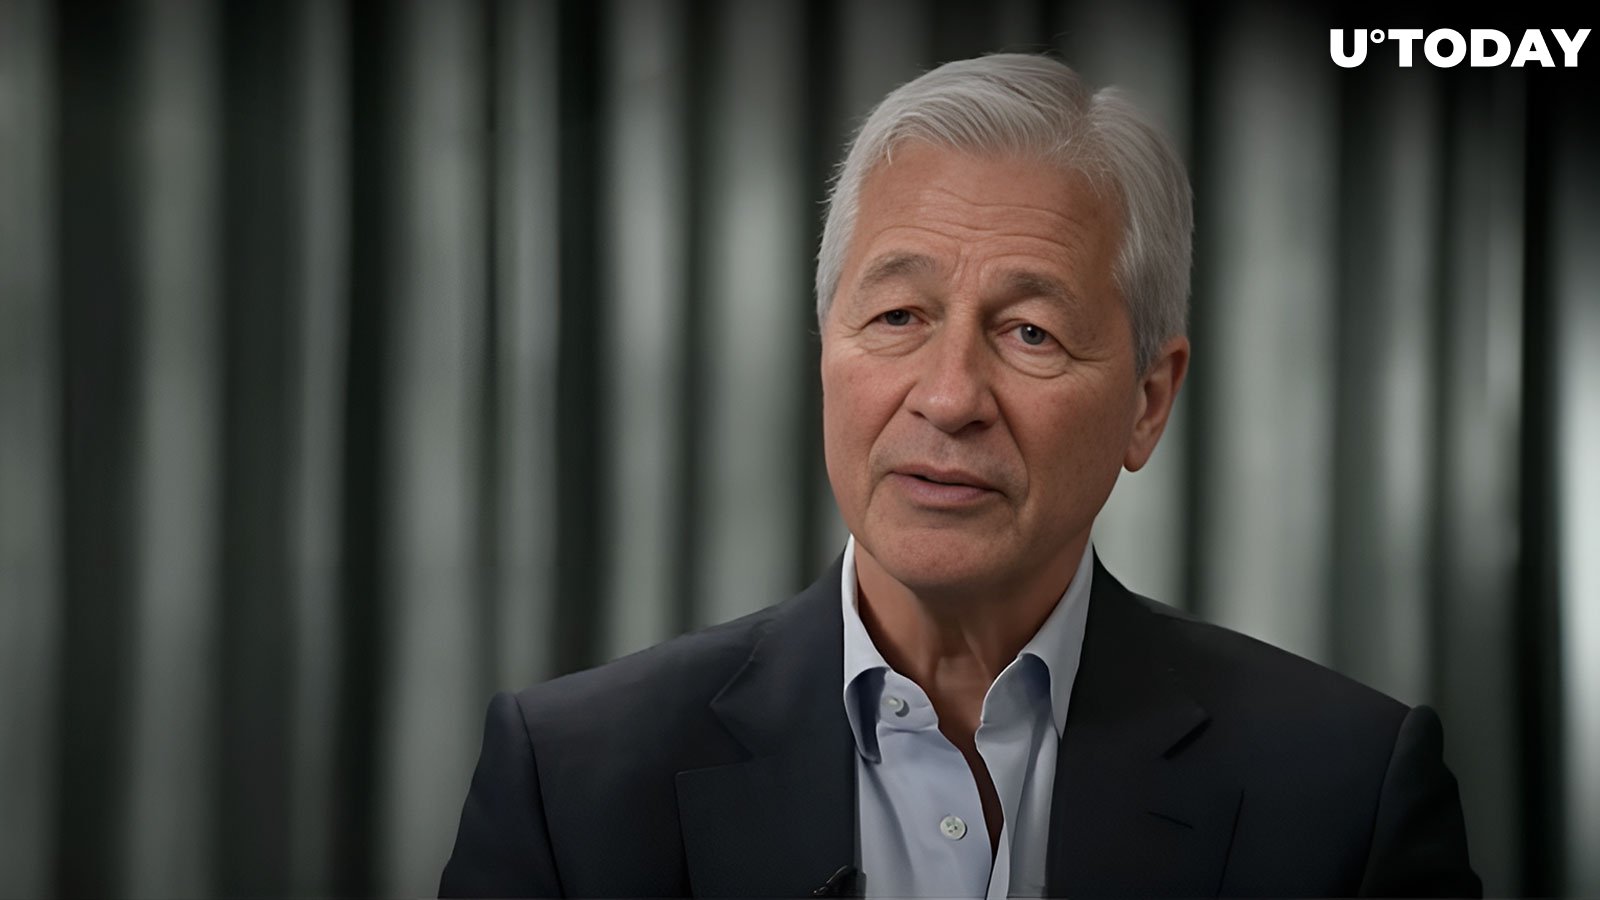 Bitcoin Hater Jamie Dimon Compares AI to Steam Engine